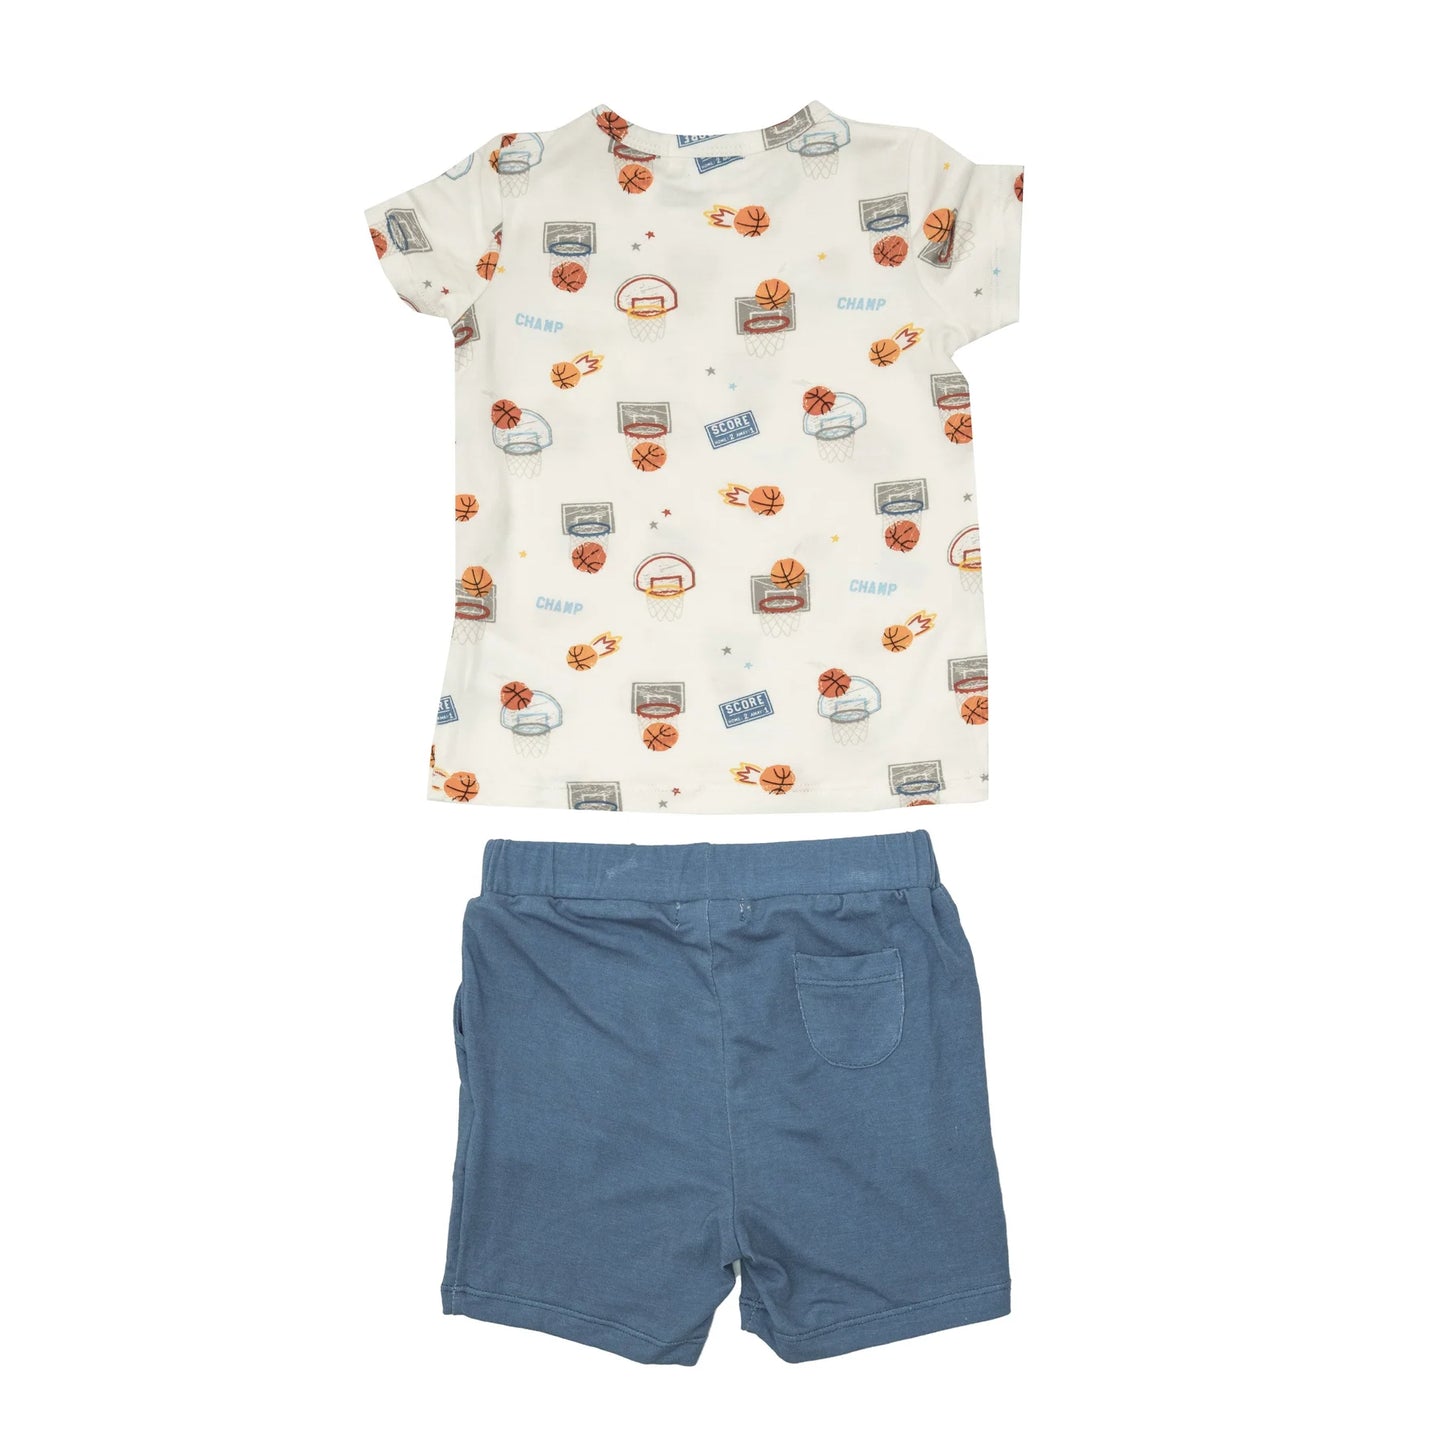 Crew Neck Tee and Short Set in Basketball  - Doodlebug's Children's Boutique